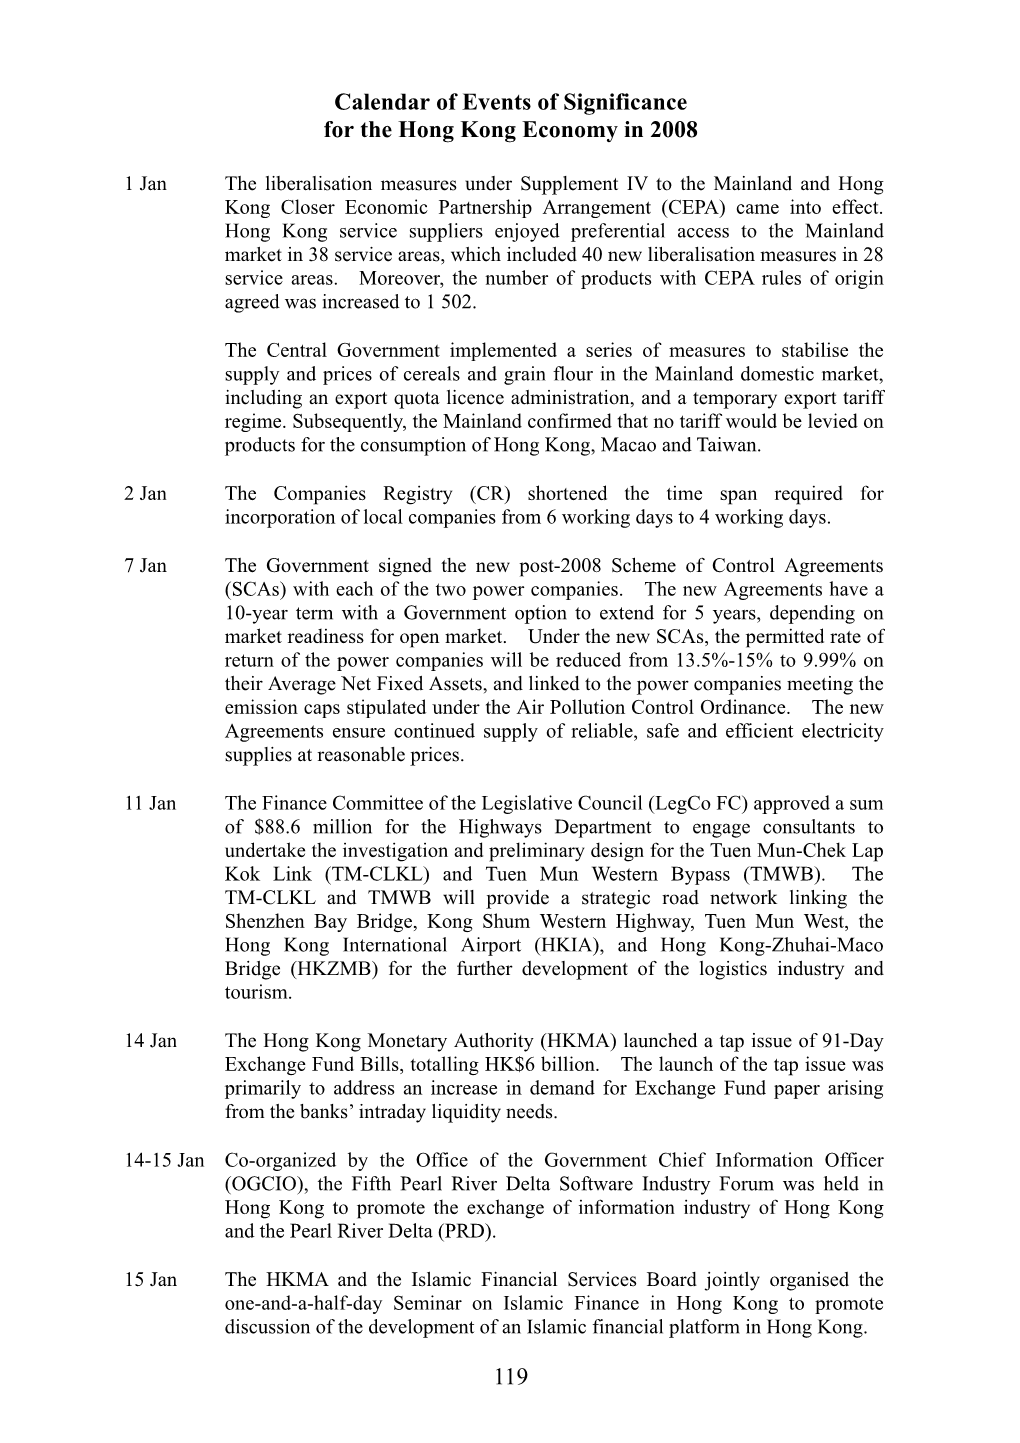 119 Calendar of Events of Significance for the Hong Kong Economy in 2008